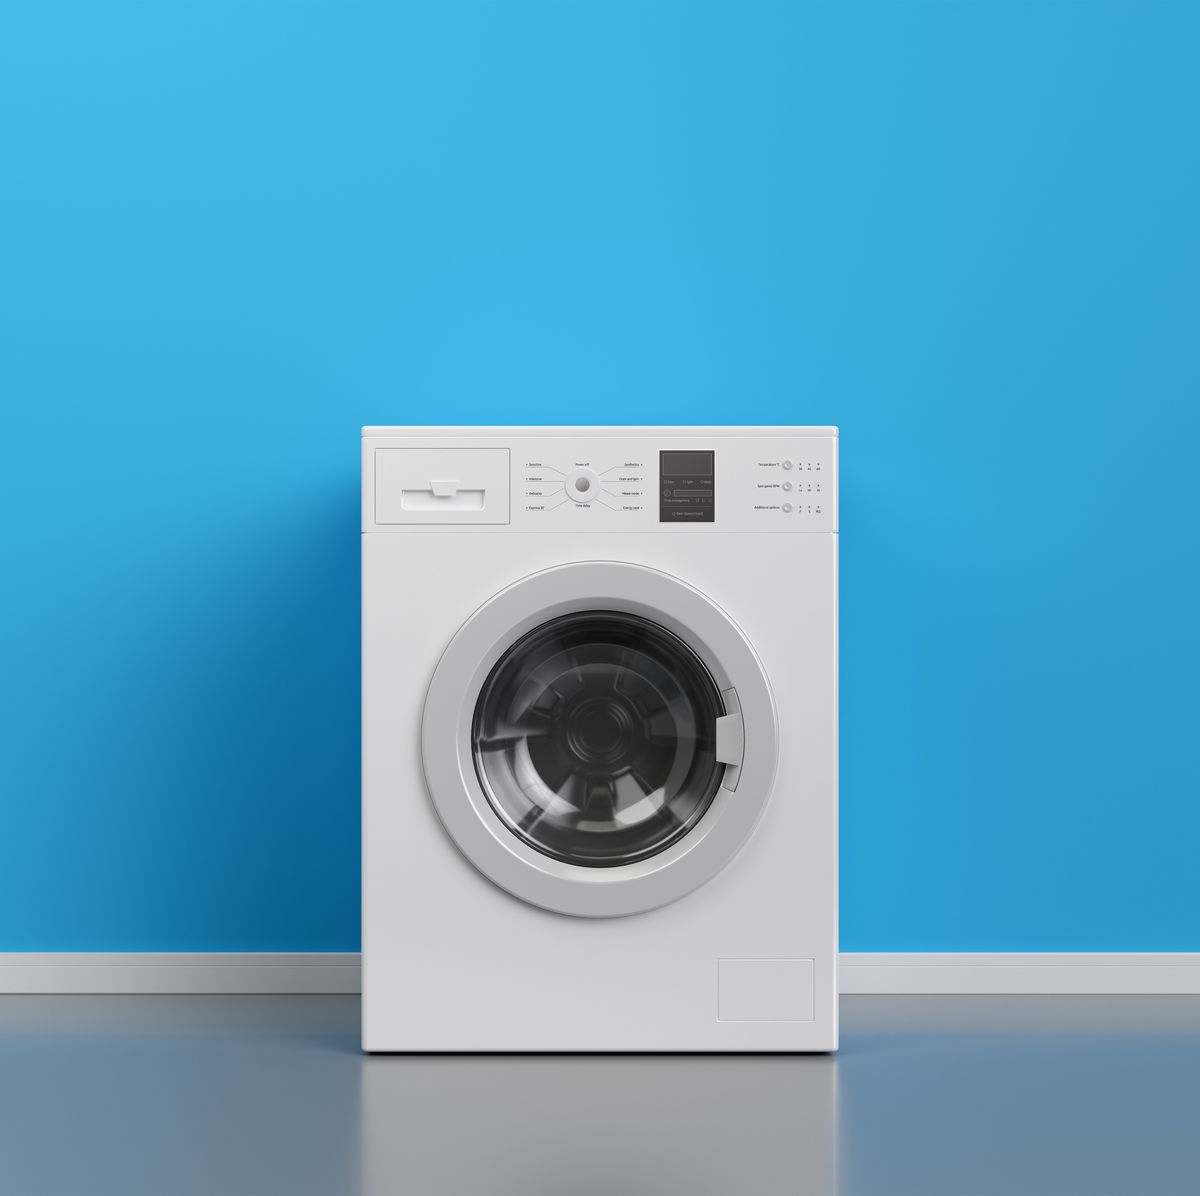 https://hips.hearstapps.com/hmg-prod/images/washing-machine-at-blue-wall-frontal-view-with-copy-royalty-free-image-1096523200-1564593294.jpg?crop=0.645xw:1.00xh;0.179xw,0&resize=1200:*